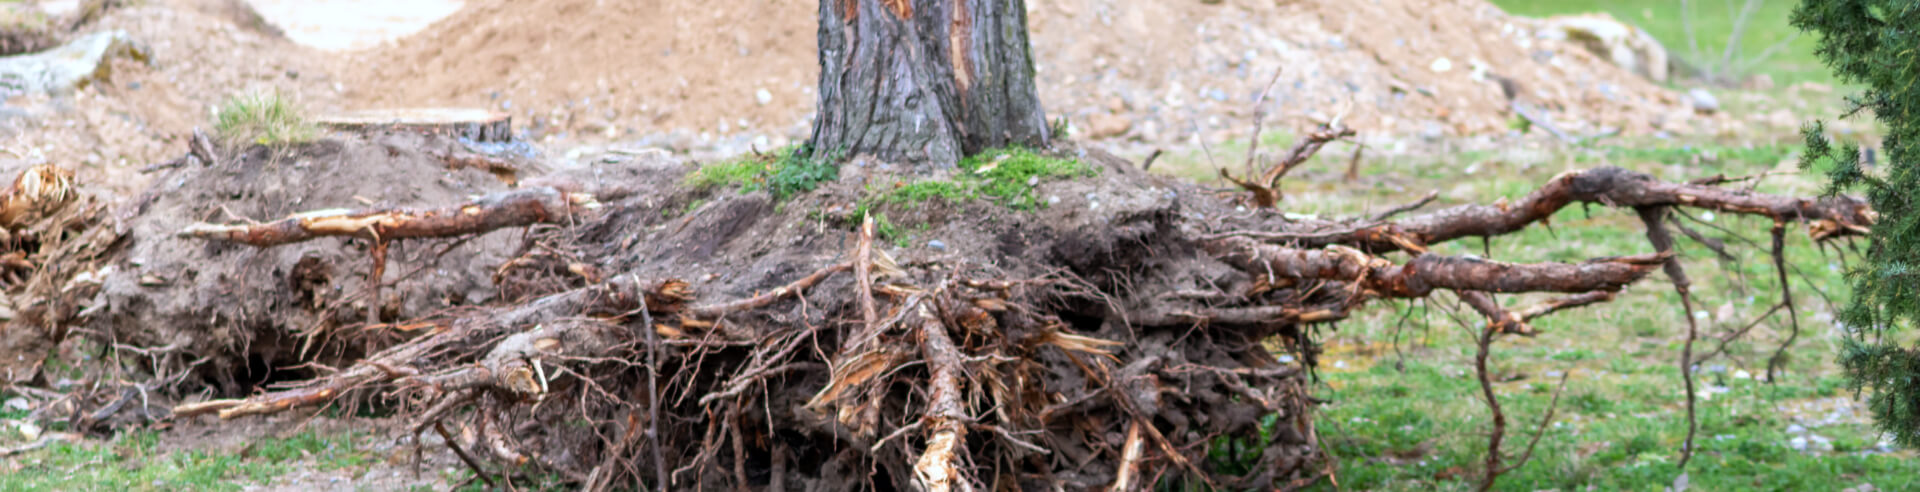 Dying Tree Roots